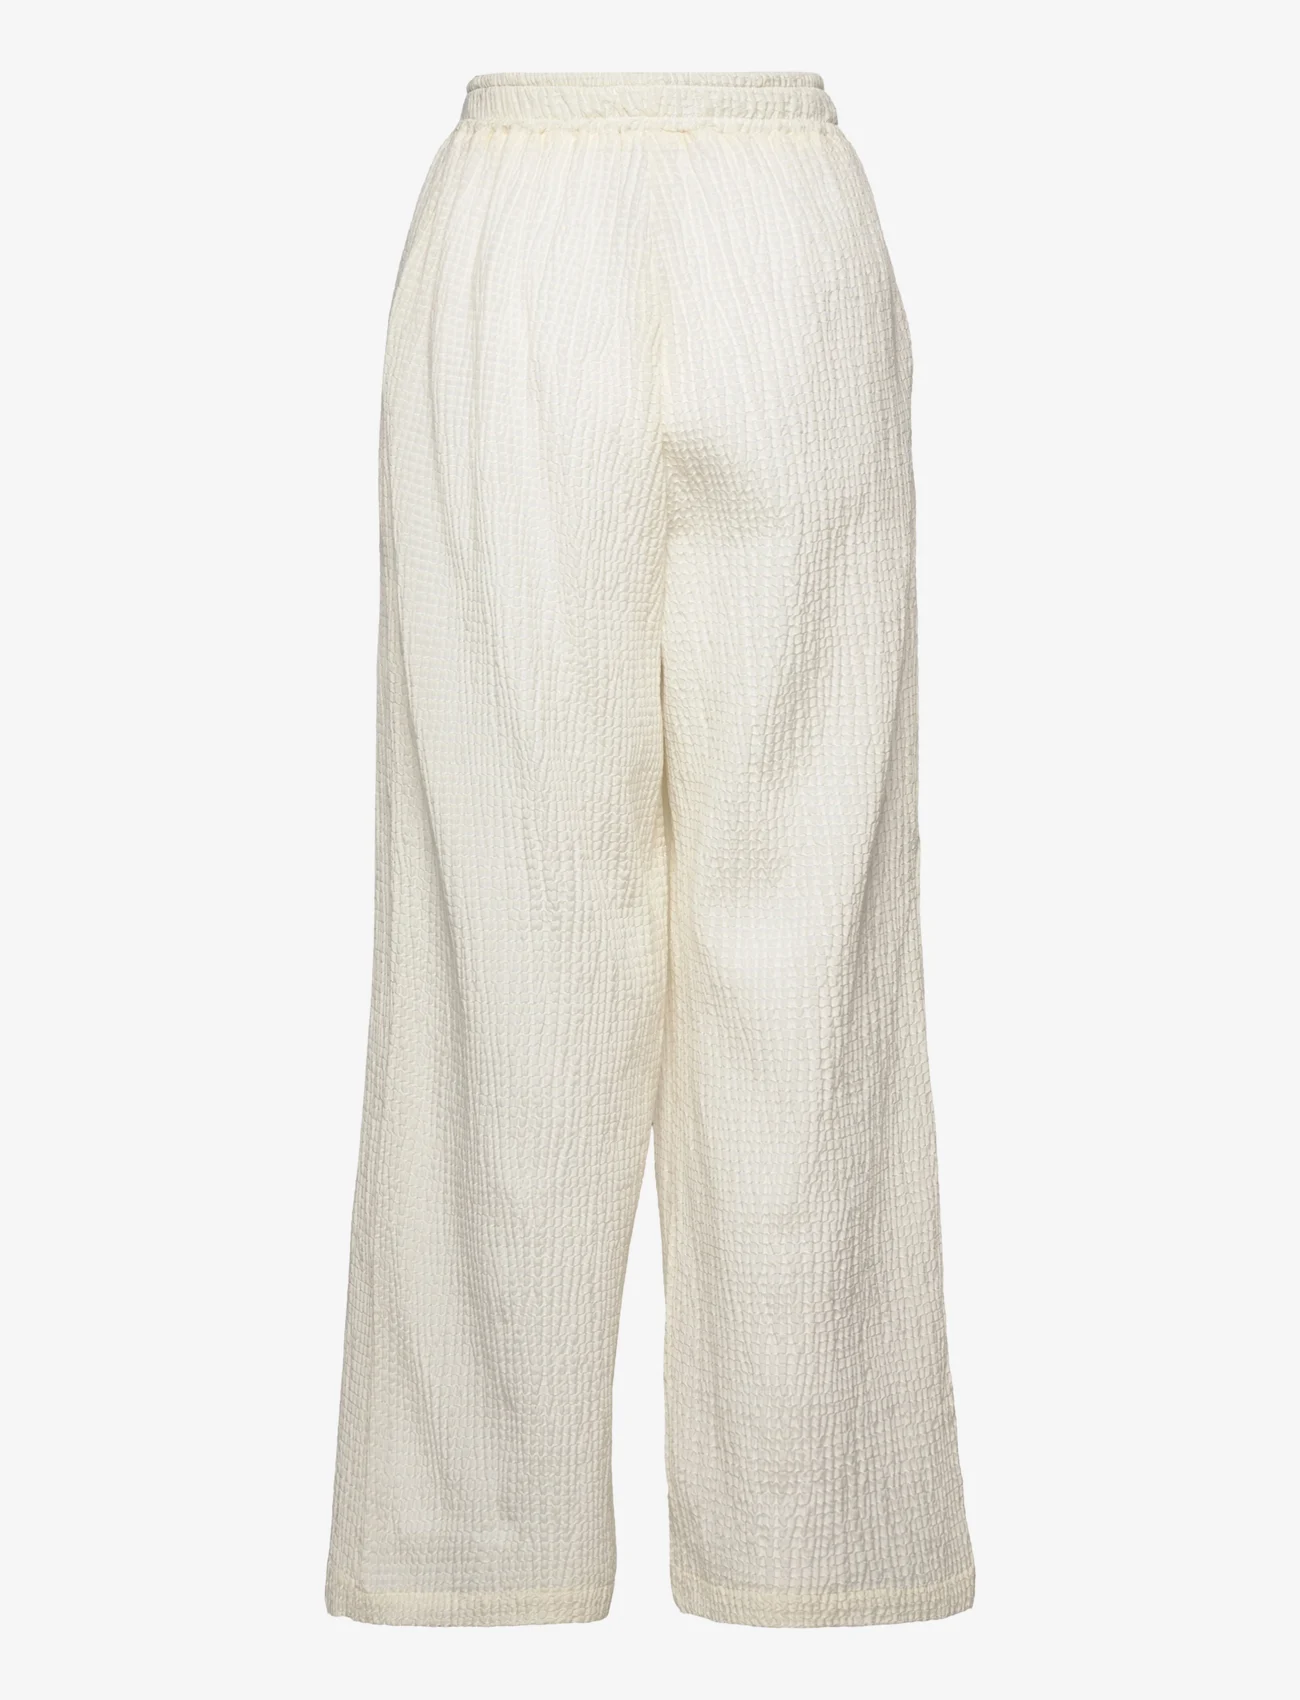 R/H Studio - DAWN TROUSERS - juhlamuotia outlet-hintaan - solid white - 1